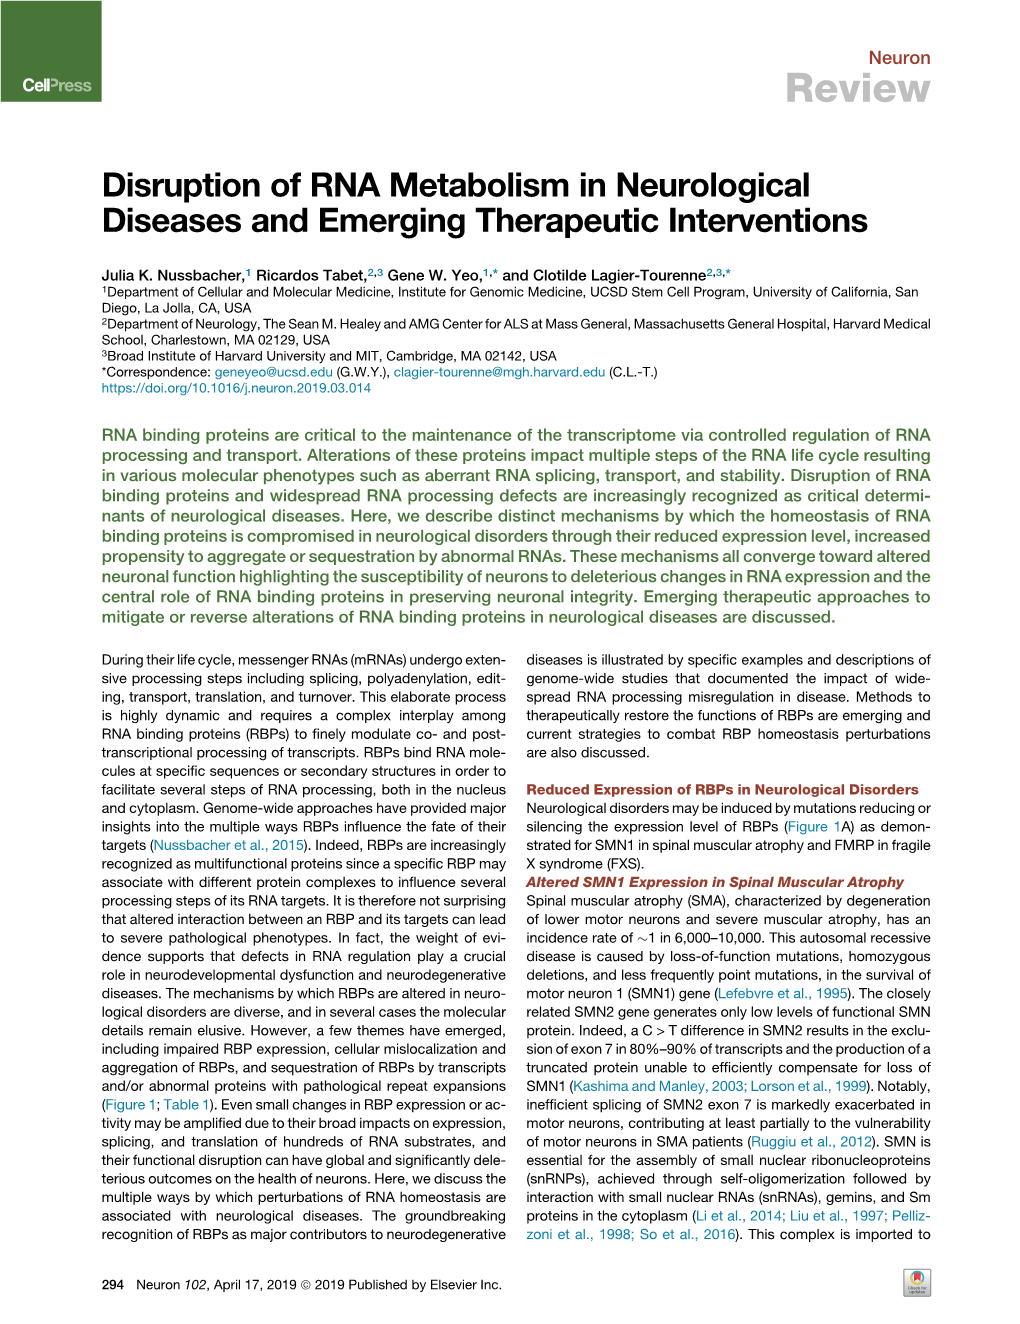 Disruption of RNA Metabolism in Neurological Diseases and Emerging Therapeutic Interventions